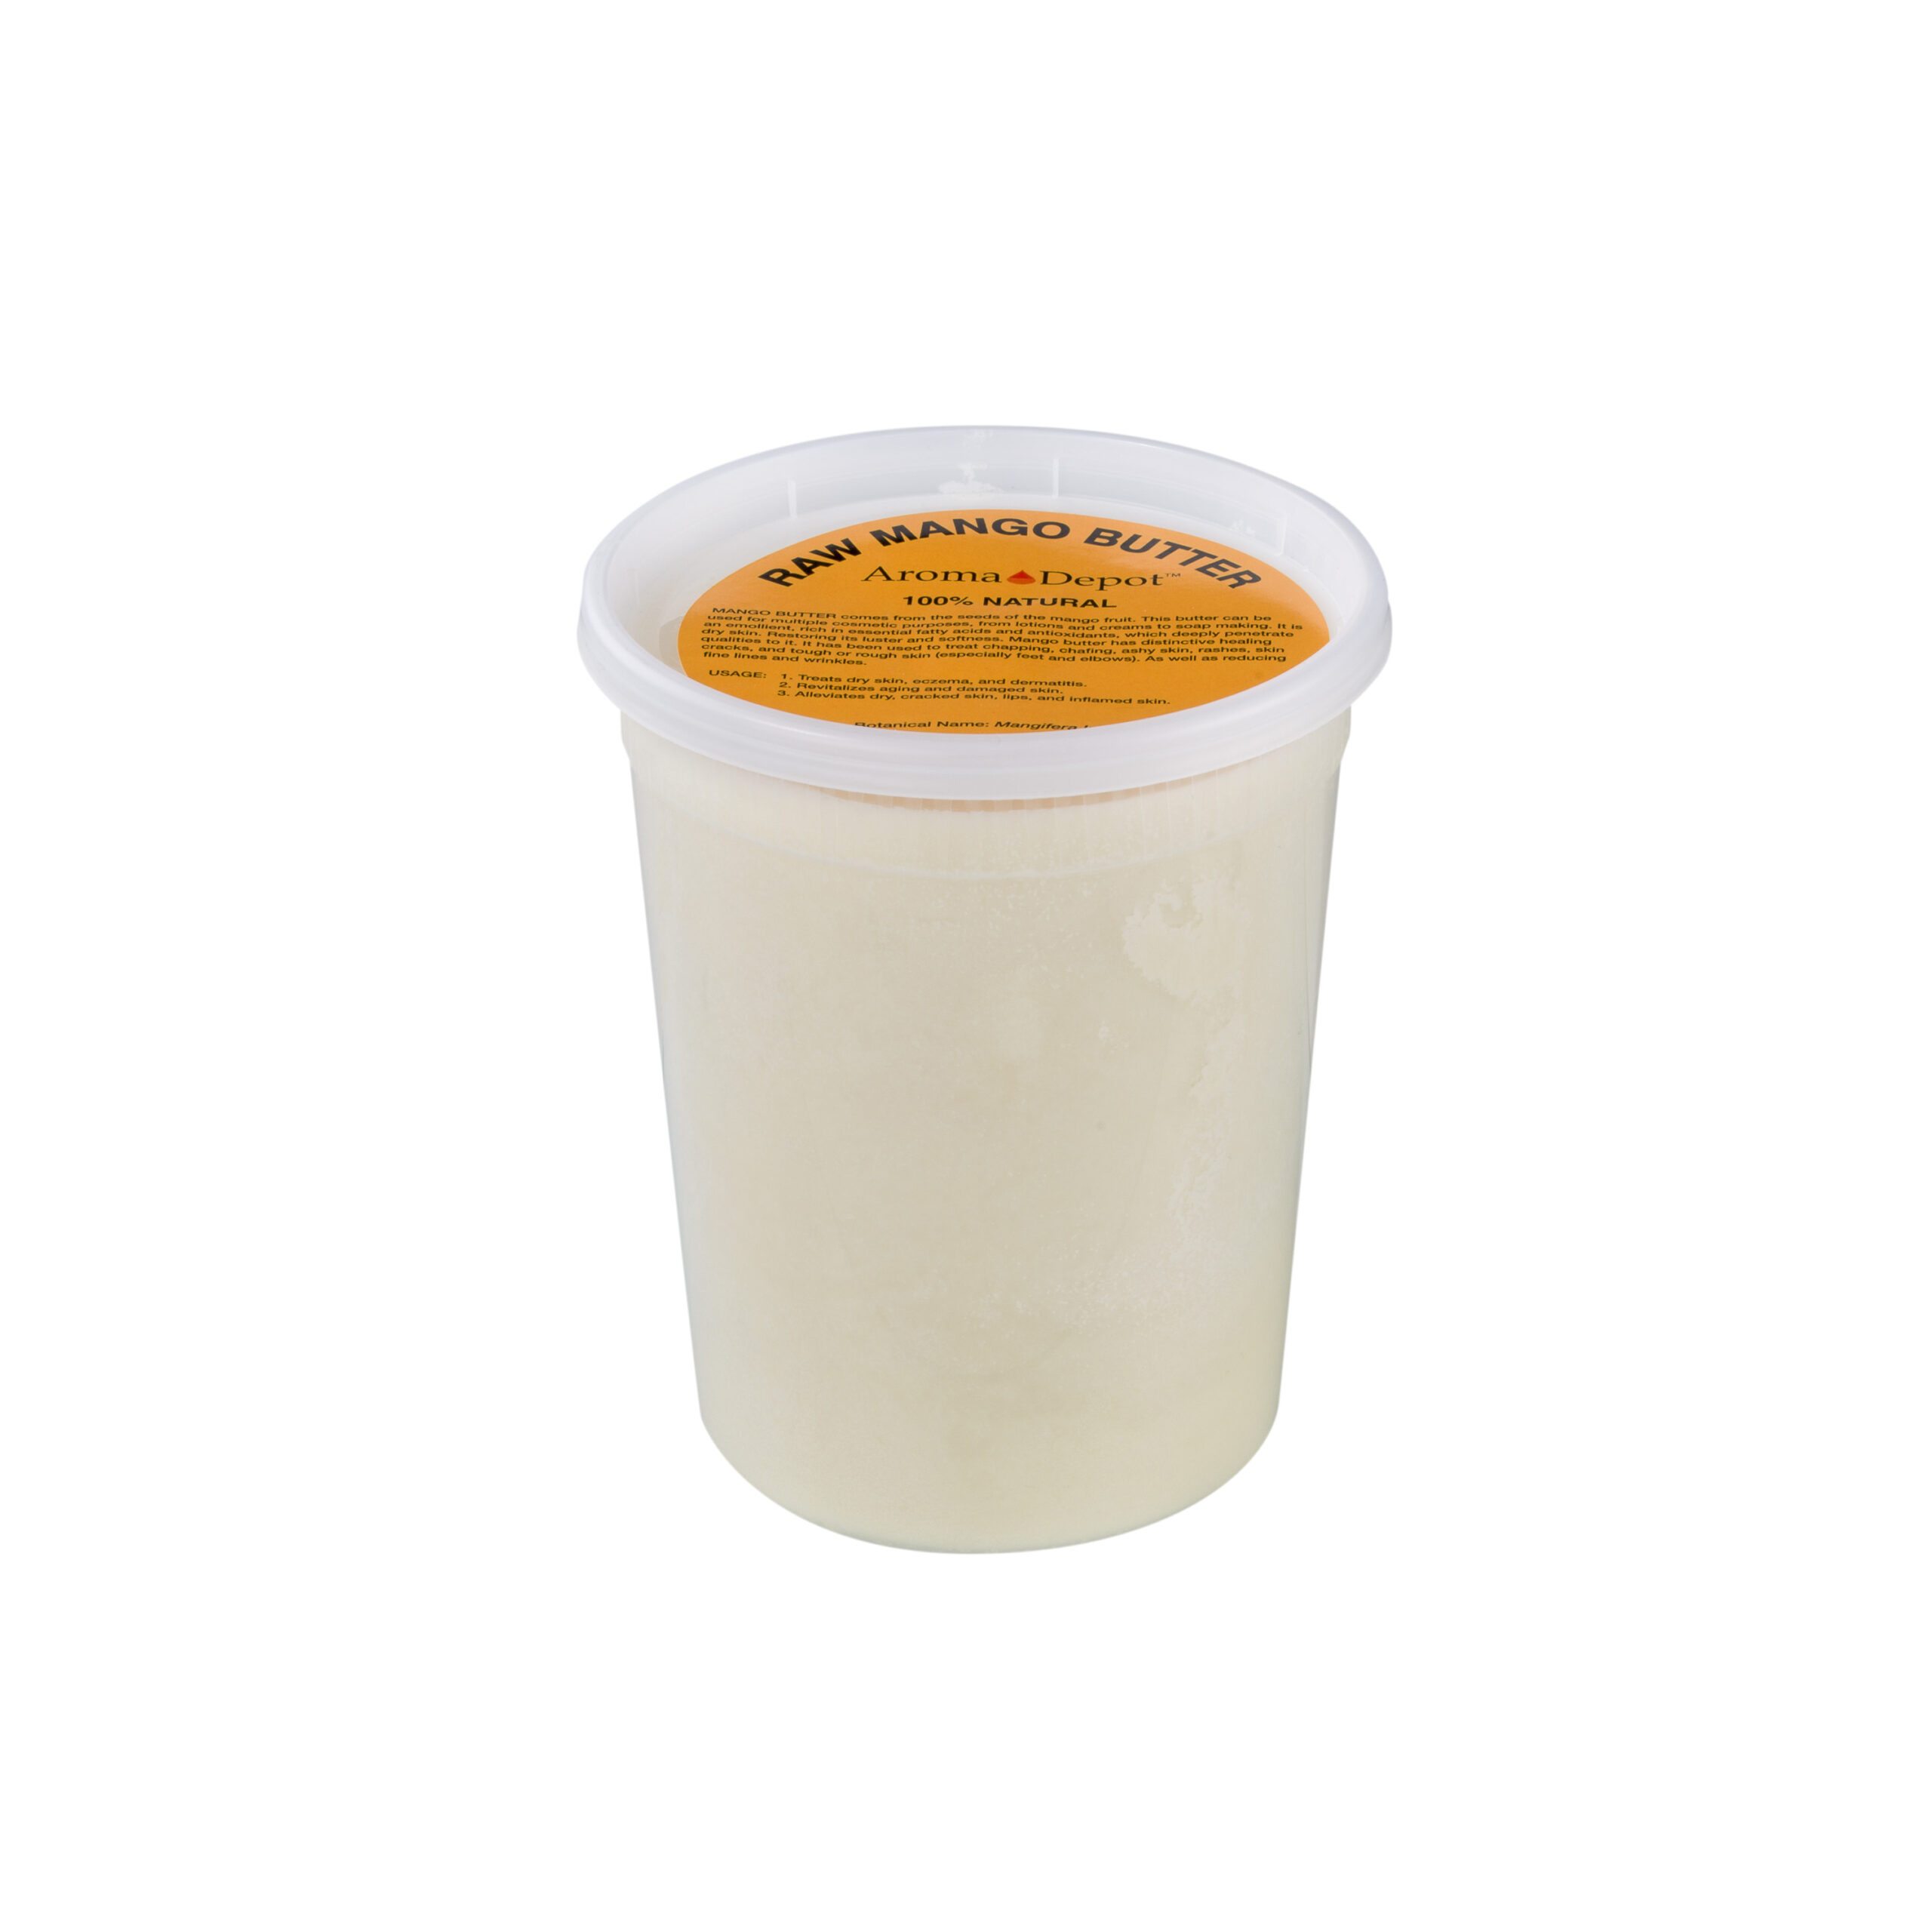 32 oz. Raw Mango Butter Container